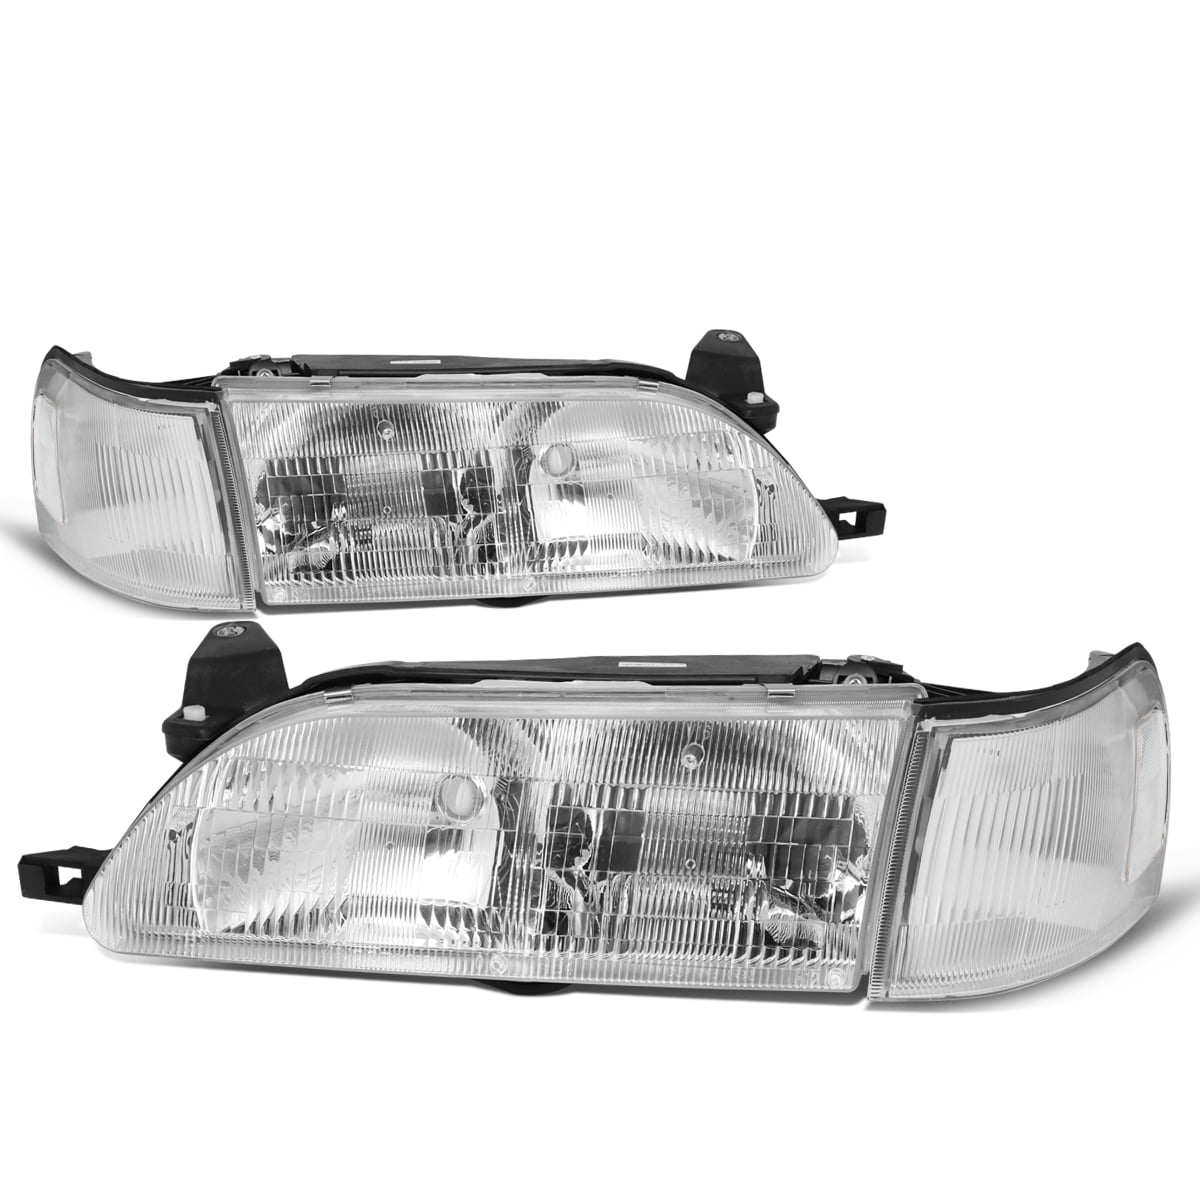 DNA Motoring HL-OH-095-CH-CL1 For 1993 to 1997 Toyota Corolla Headlight  Chrome Housing Clear Corner Headlamp 94 95 96 Left + Right